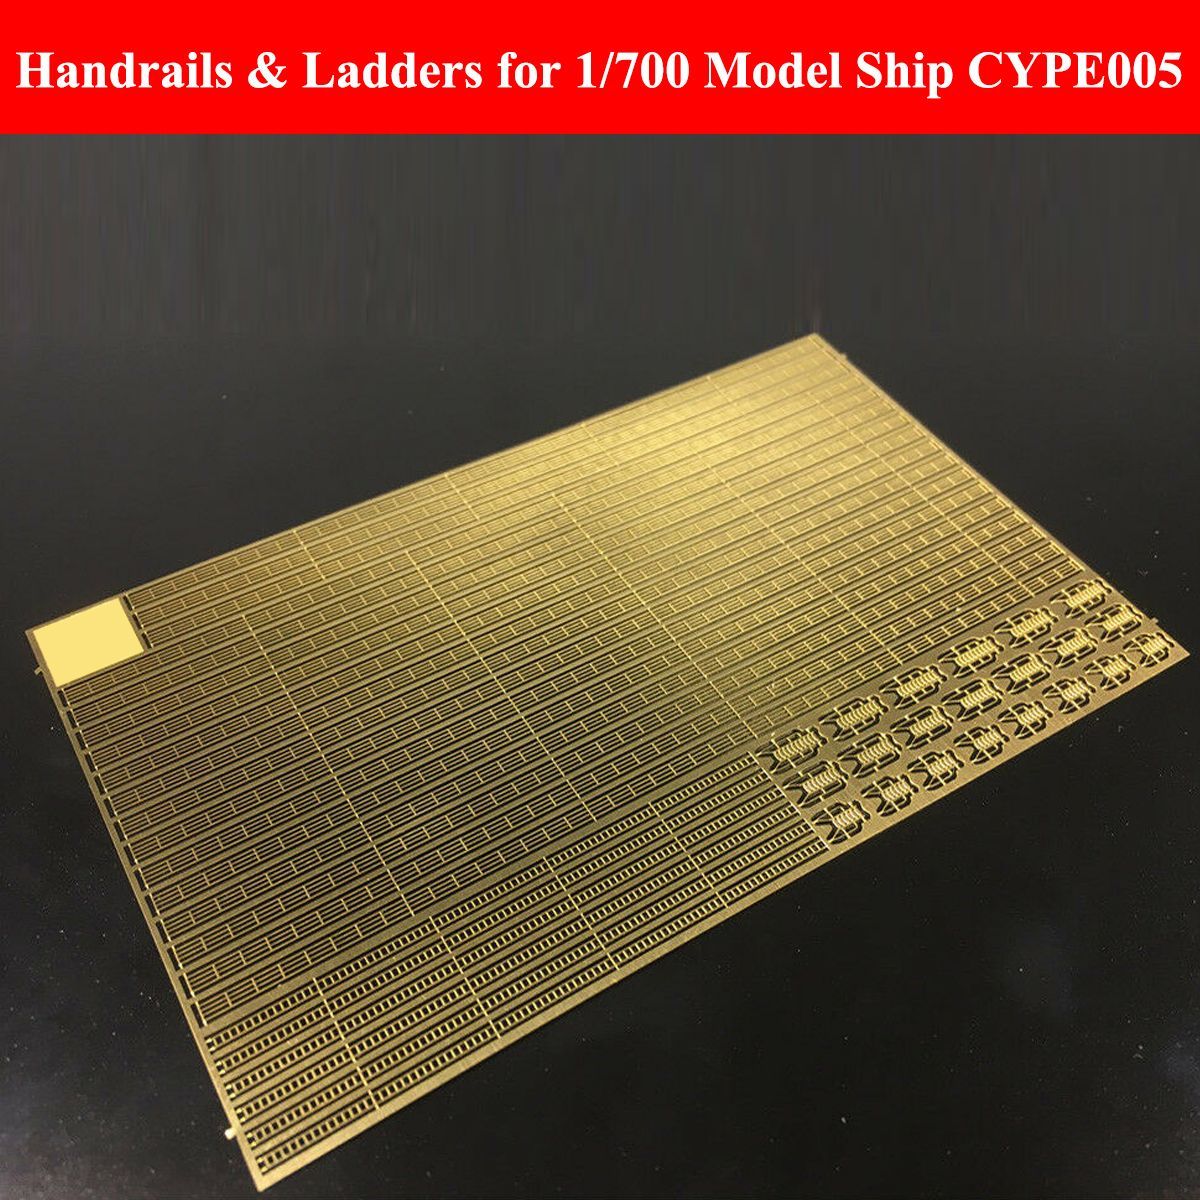 Photo-Etch-PE-Handrails-and-Boat-Ladder-for-1700-Model-Ship-CYPE005-Model-Kit-1671085